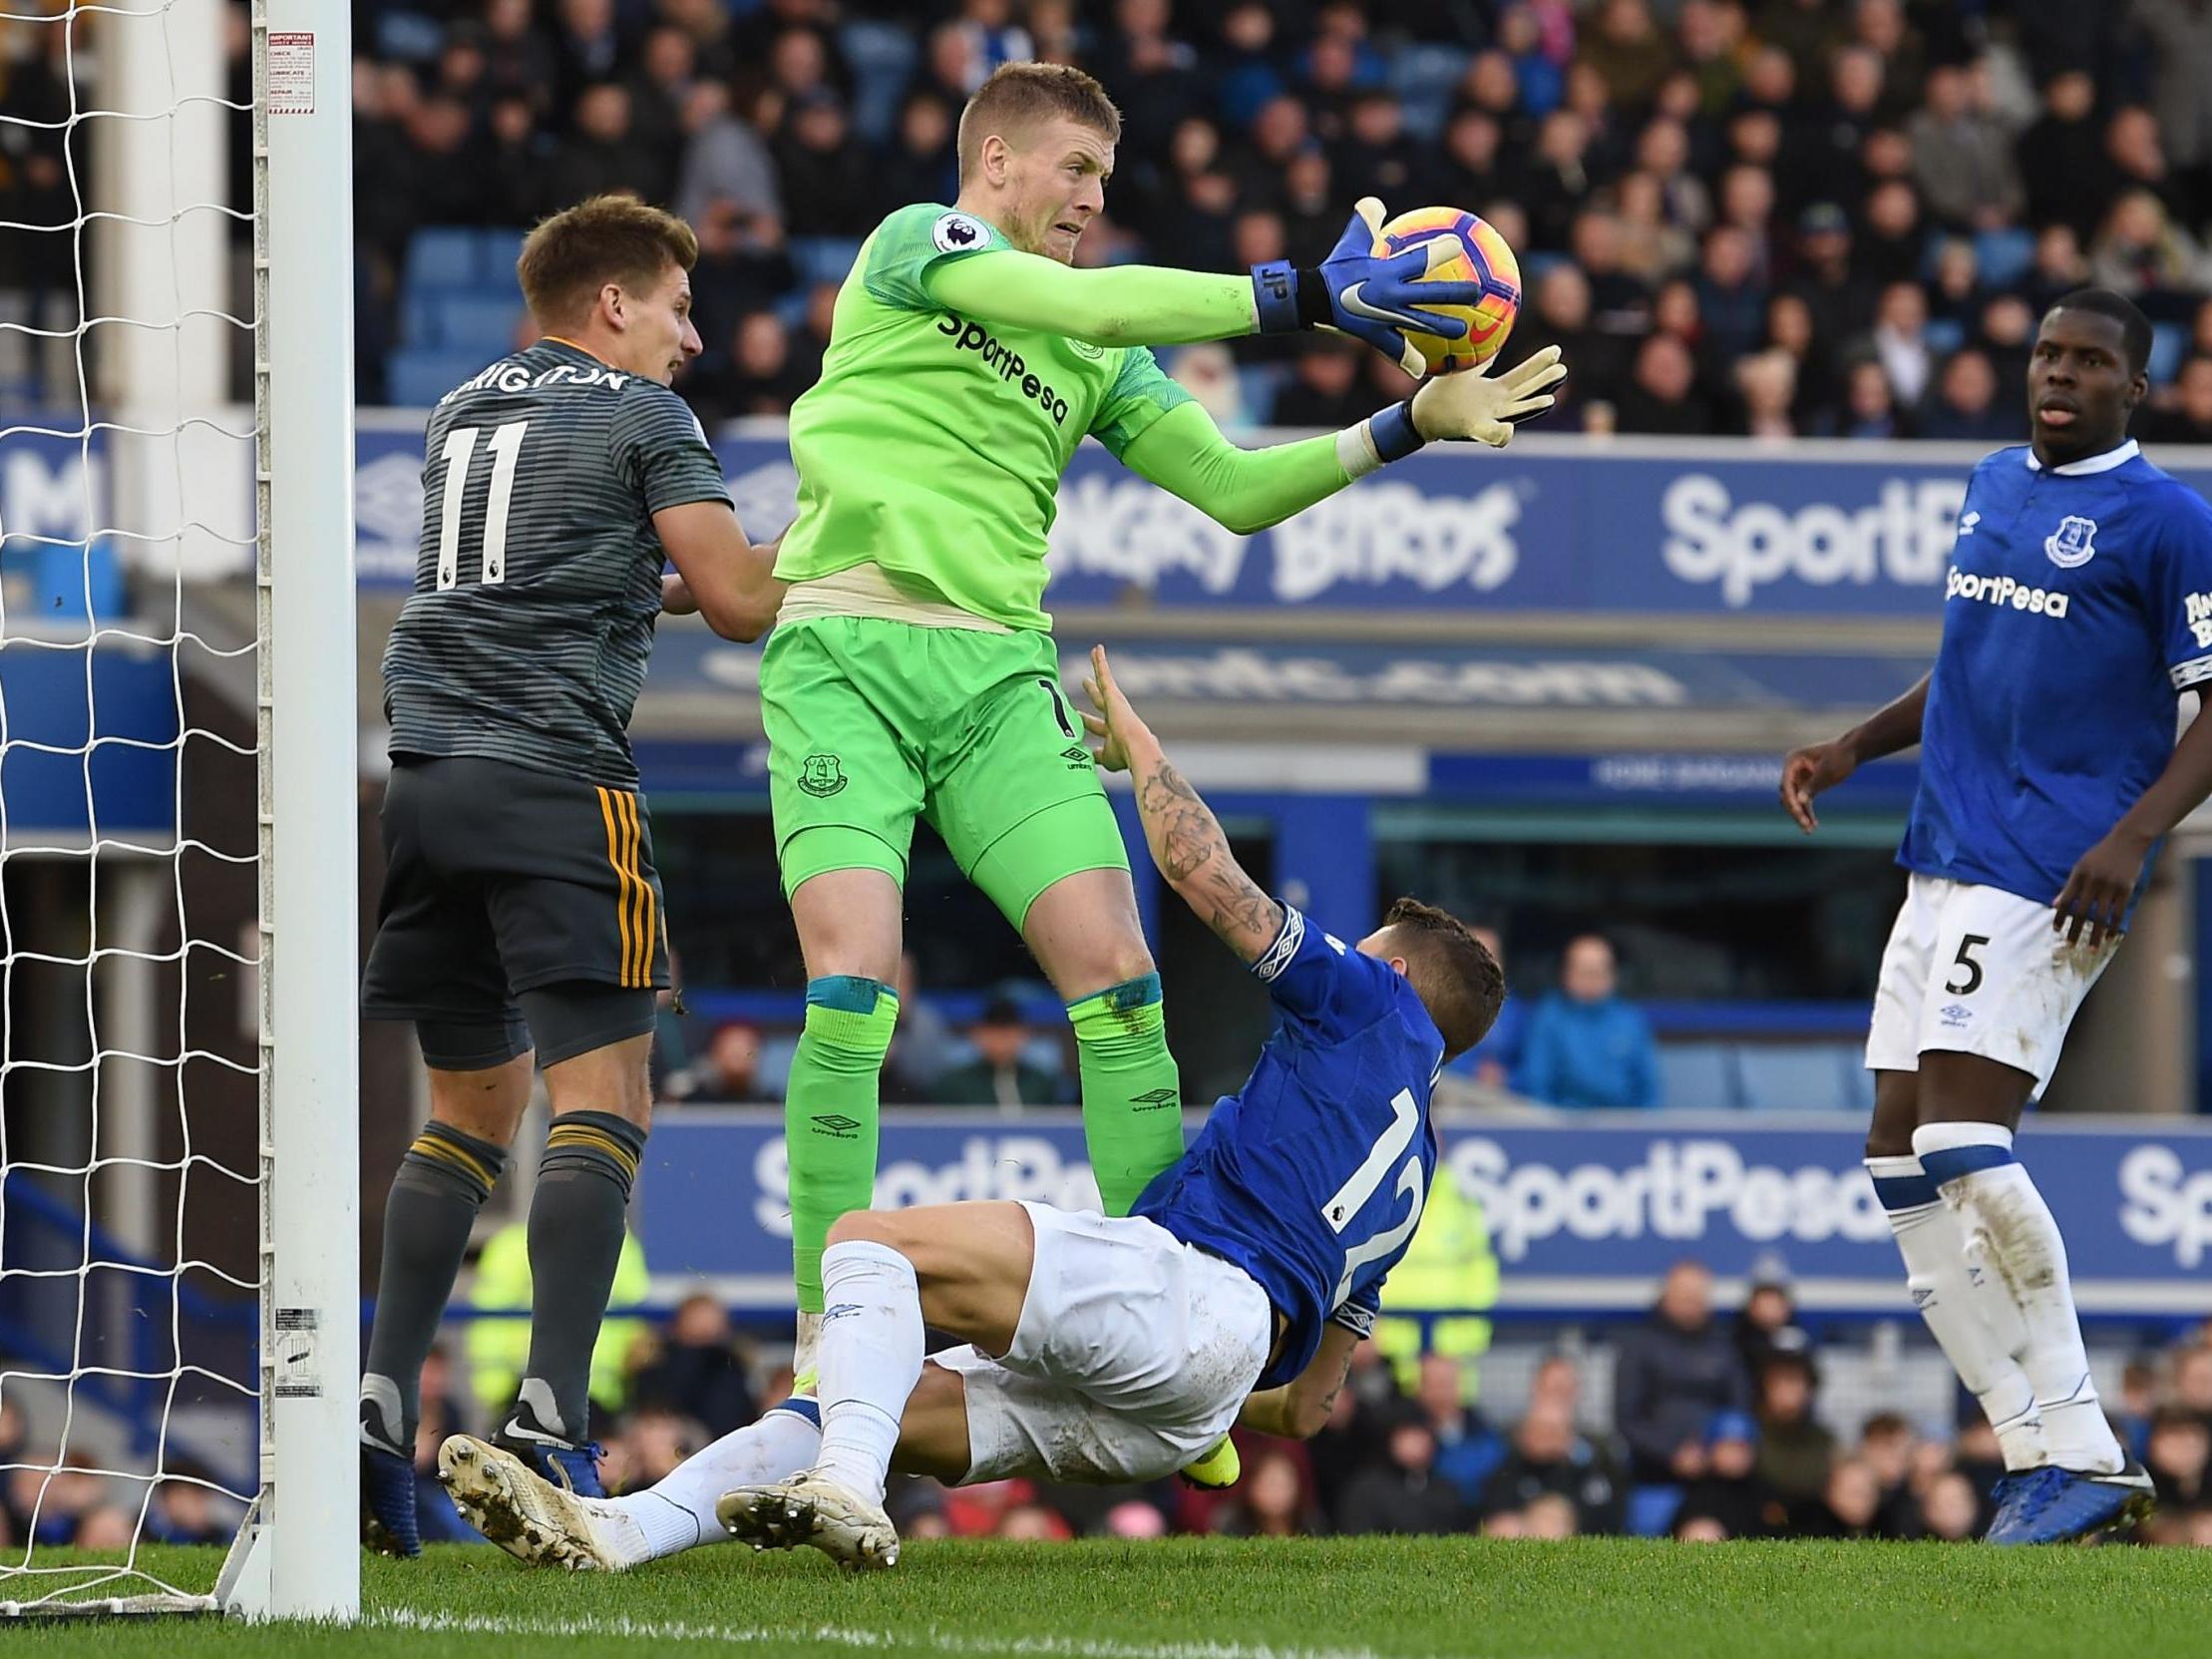 Jordan Pickford collects the ball under pressure from a Leicester attack